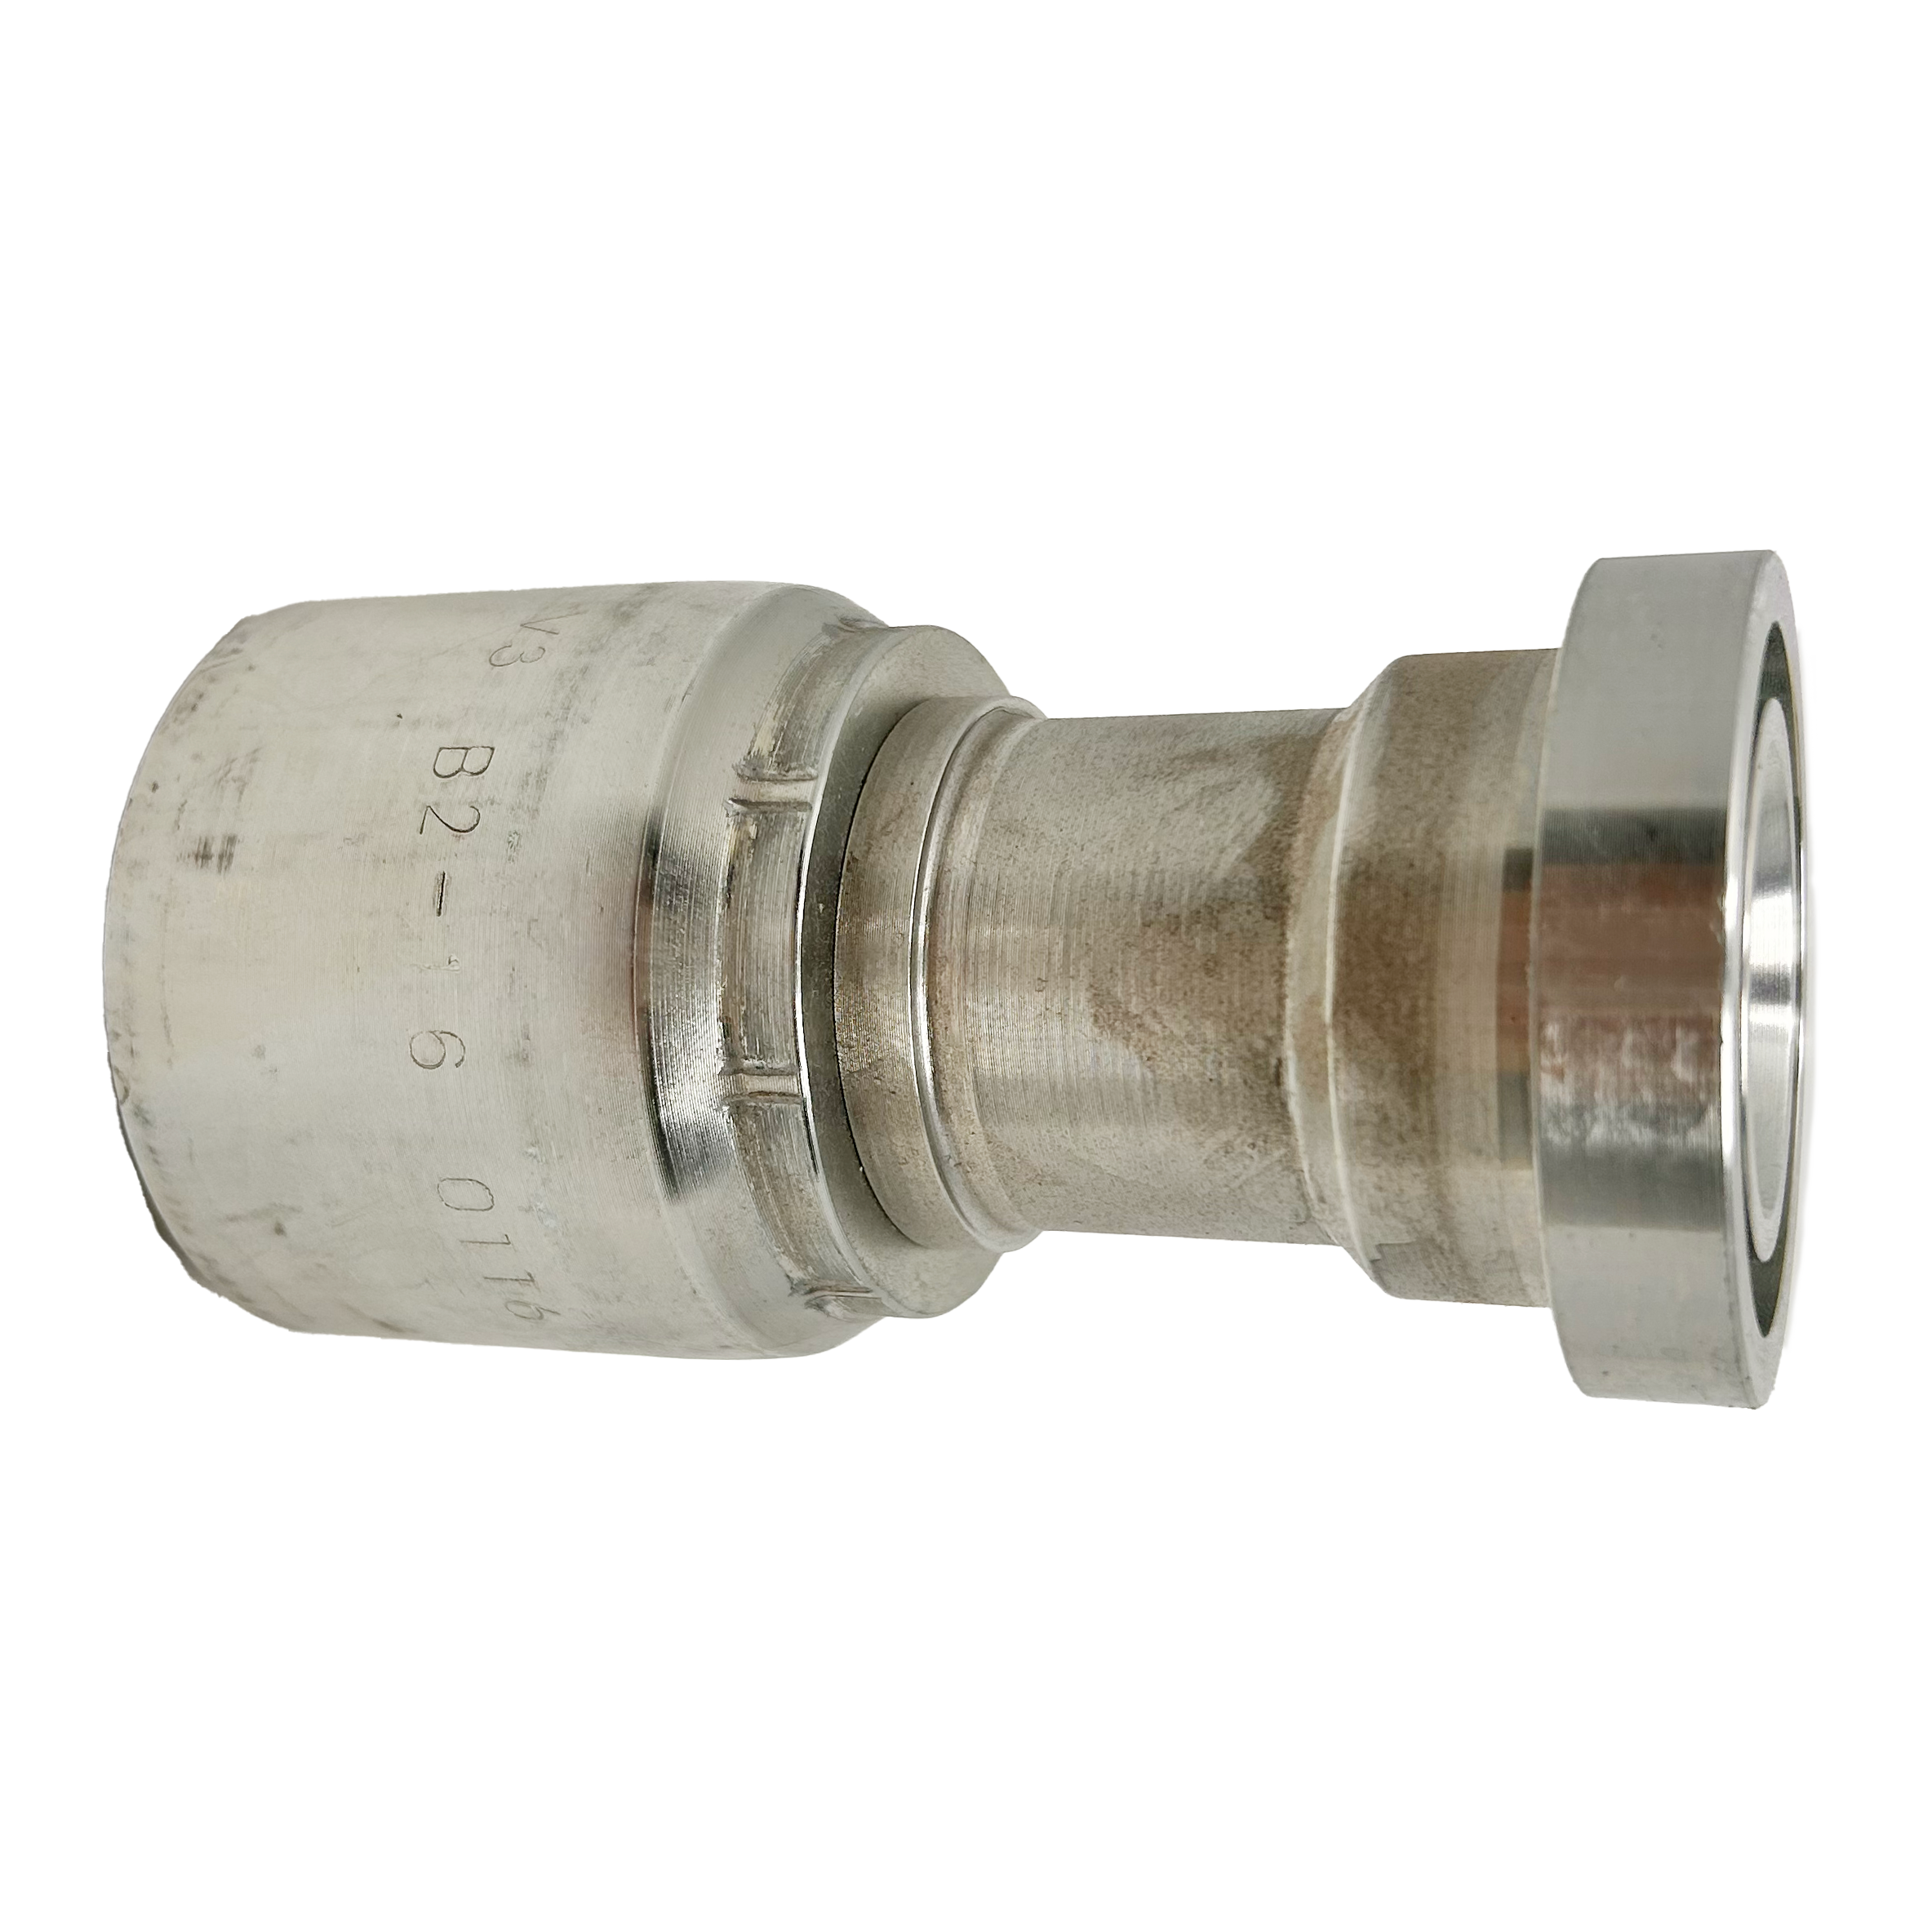 B2-FH-2020: Continental Hose Fitting, 1.25 (1-1/4") Hose ID x 1.25 (1-1/4") Code 62, Straight Connection